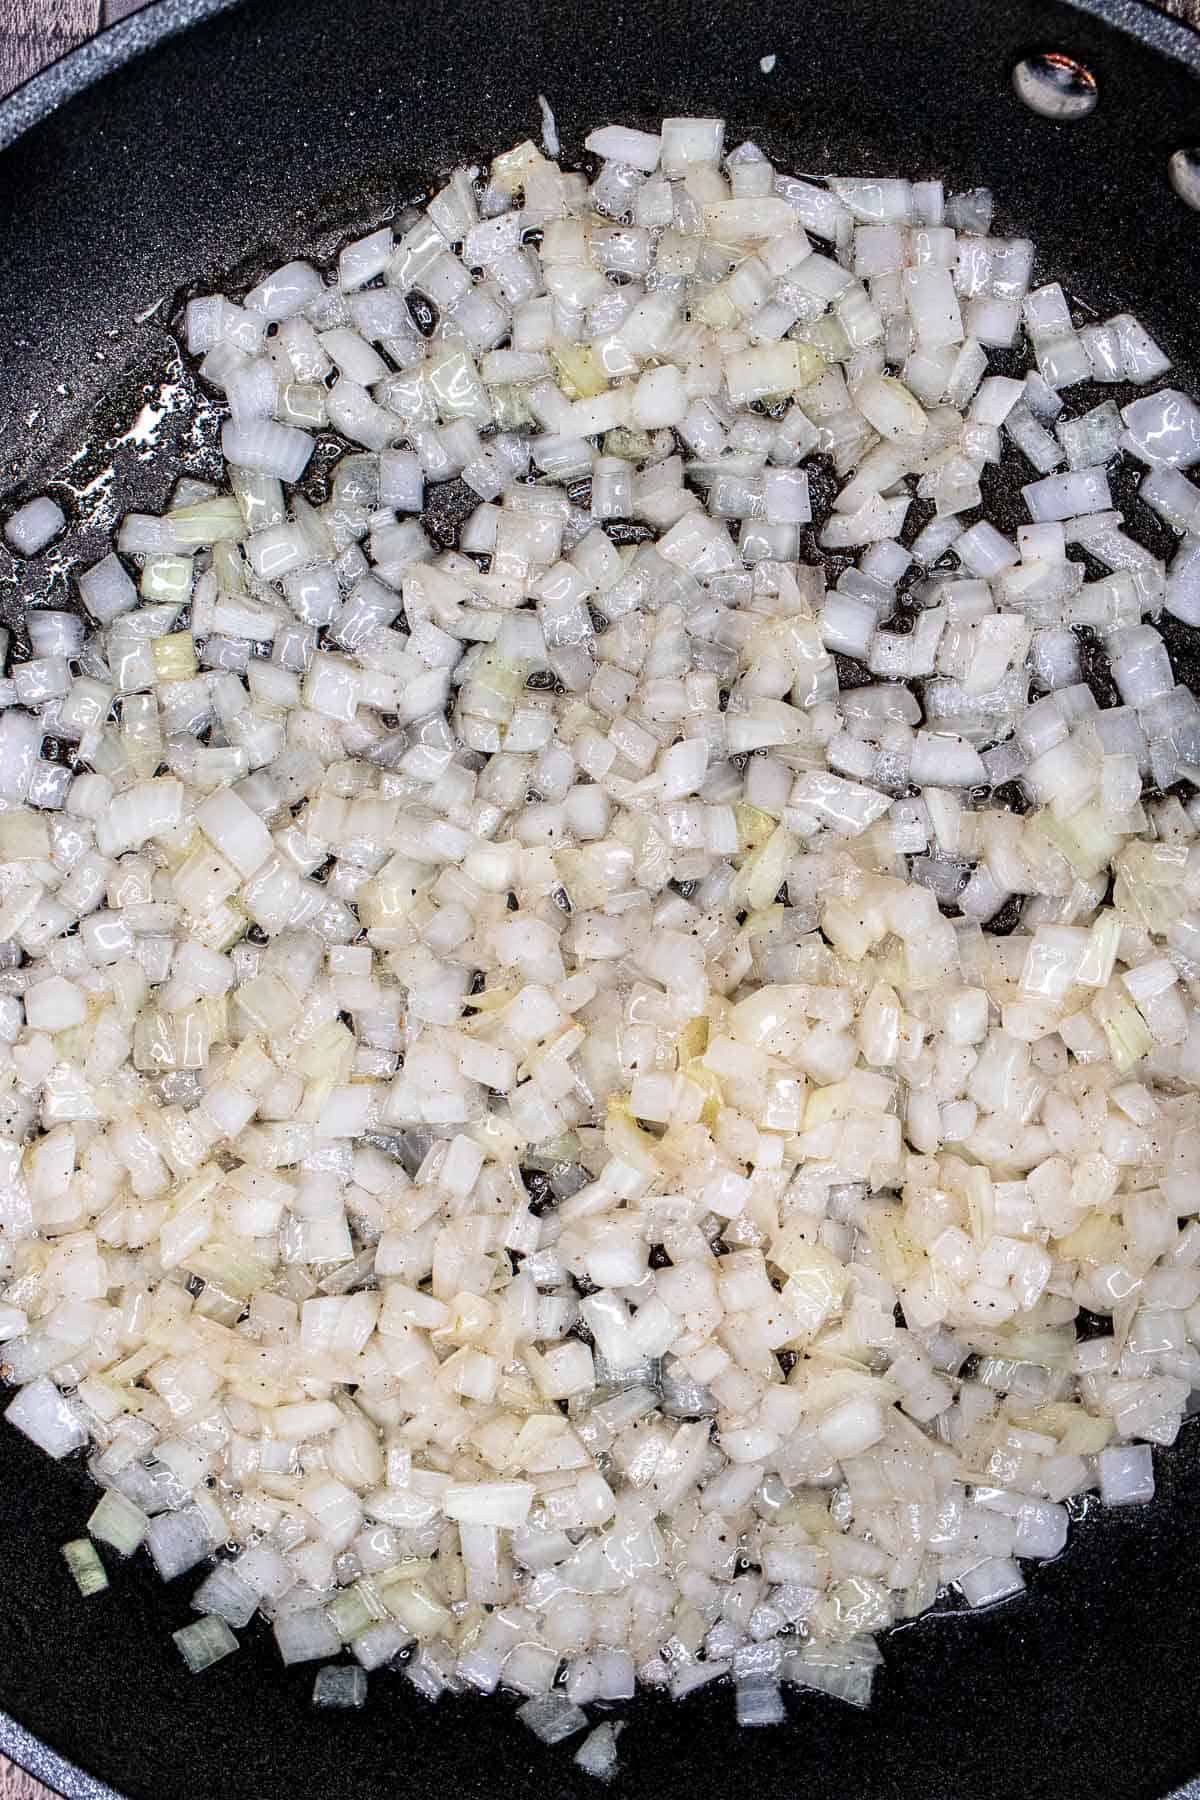 Diced onion sauteed in bacon fat.